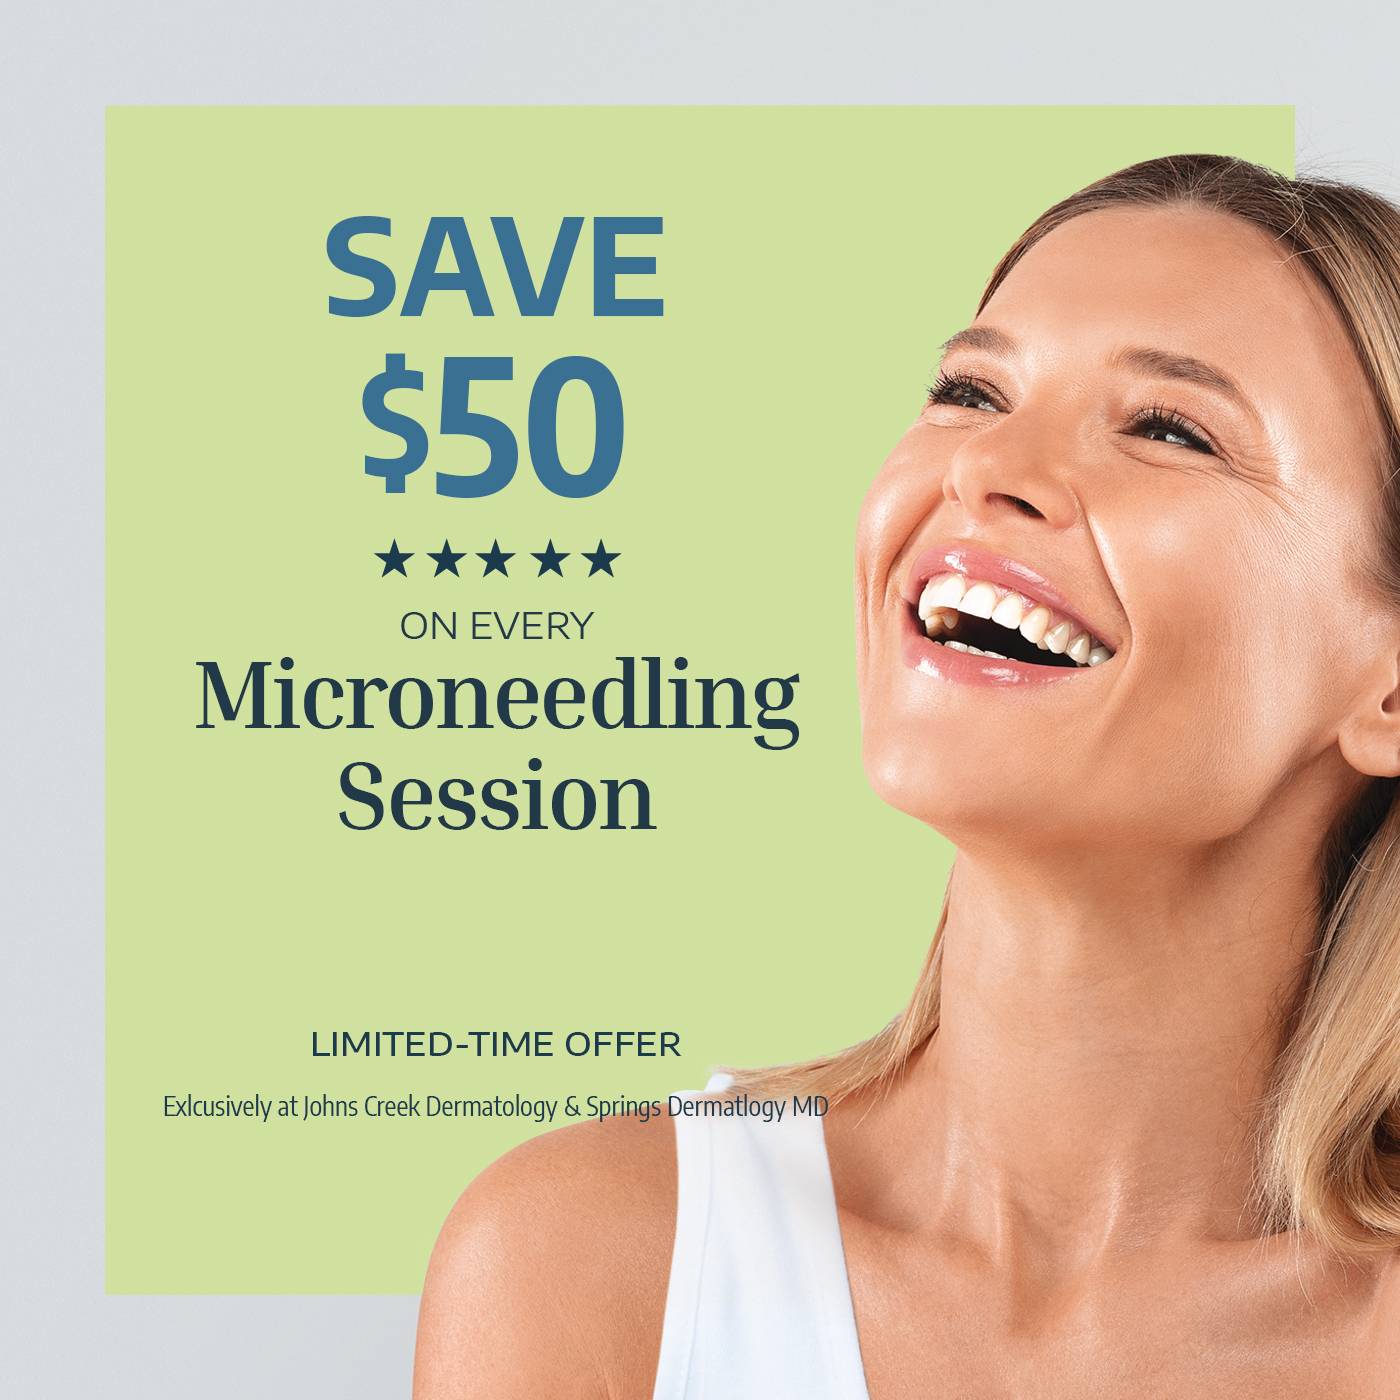  A smiling woman with radiant skin. Save $50 on every Microneedling session with Johns Creek Dermatology limited-time offer.  